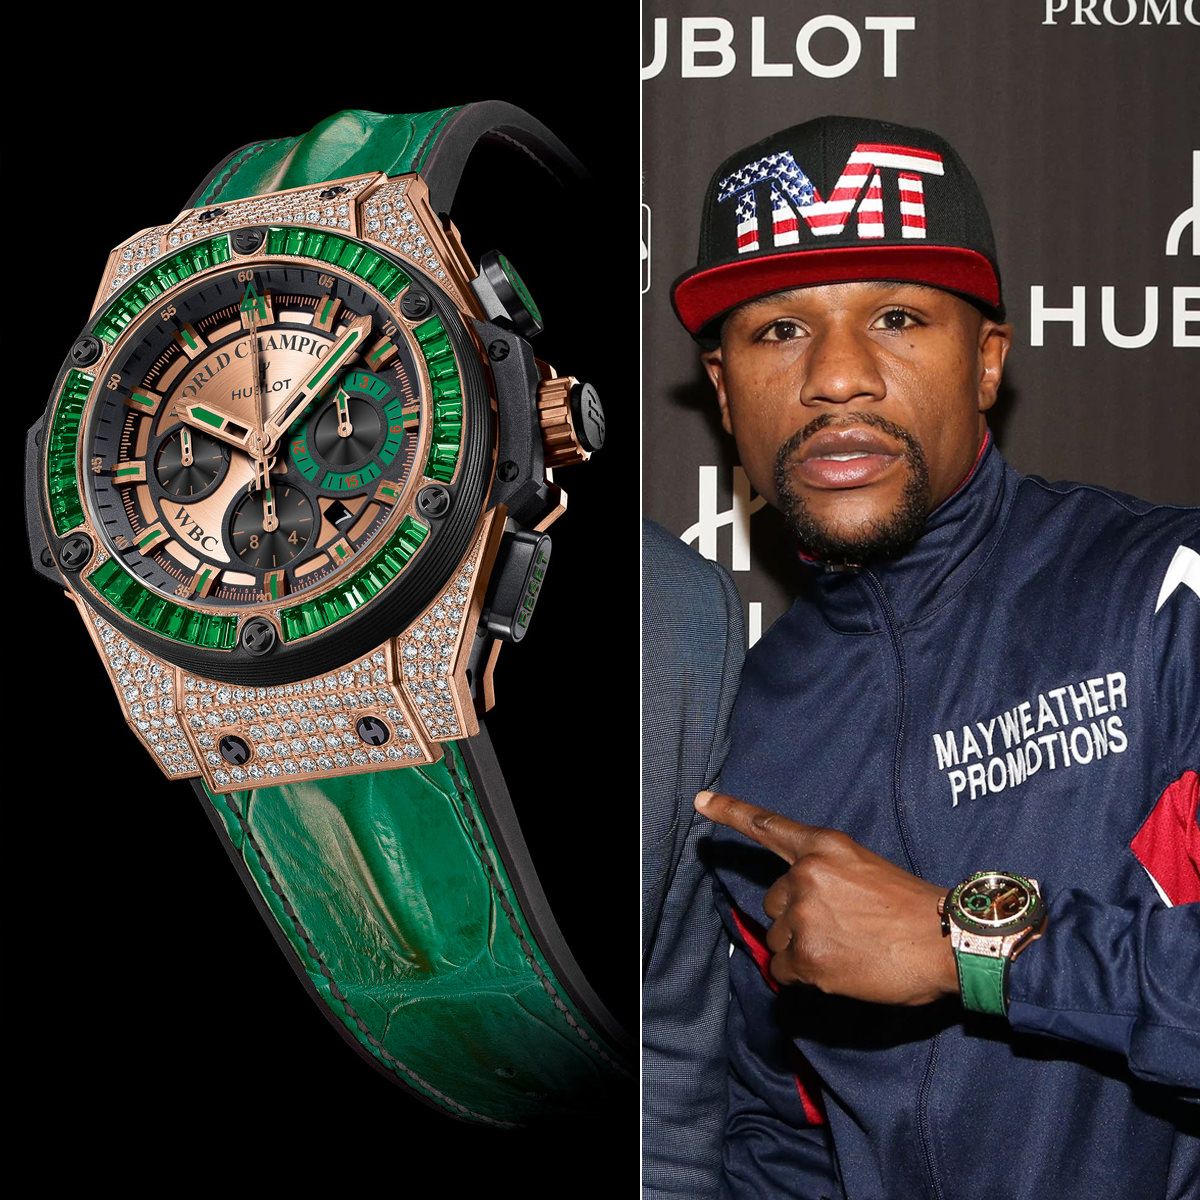 Luxury wrist watches from Floyd Mayweather and Conor McGregor's collection